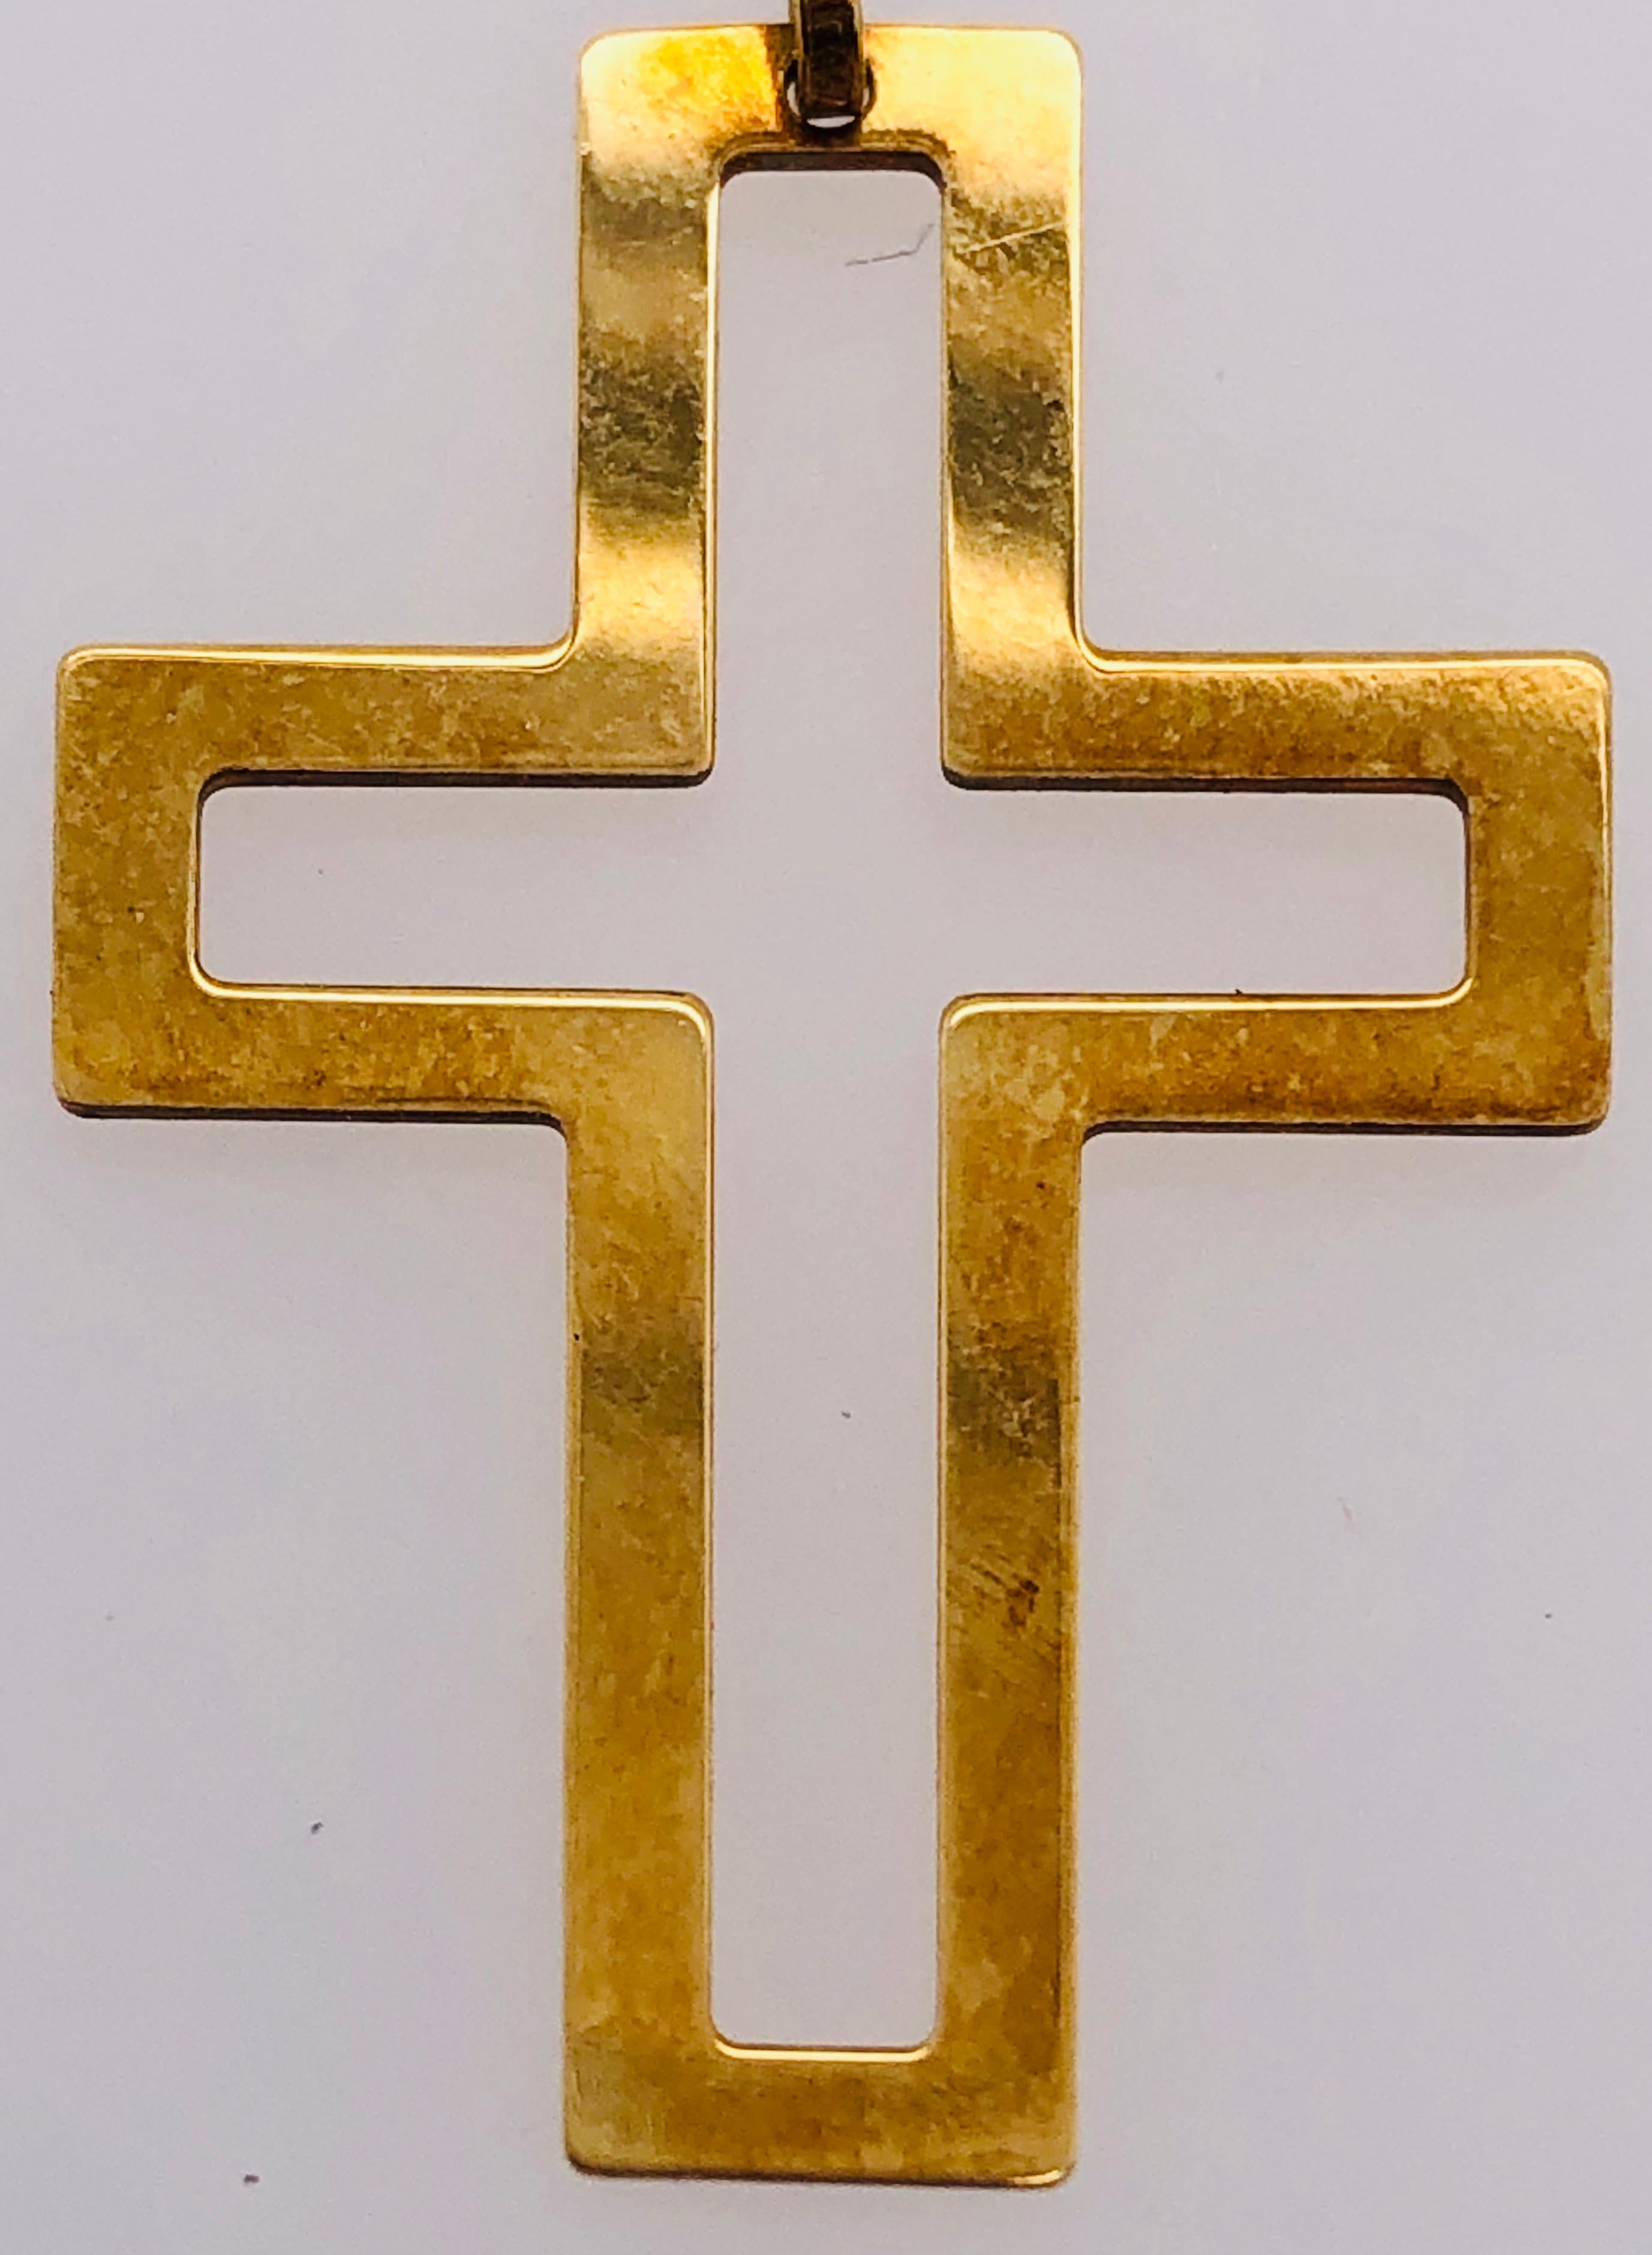 18Kt Yellow Gold Cross / Religious Pendant
1.43 grams total weight 21.5mm by 30.5 mm. 